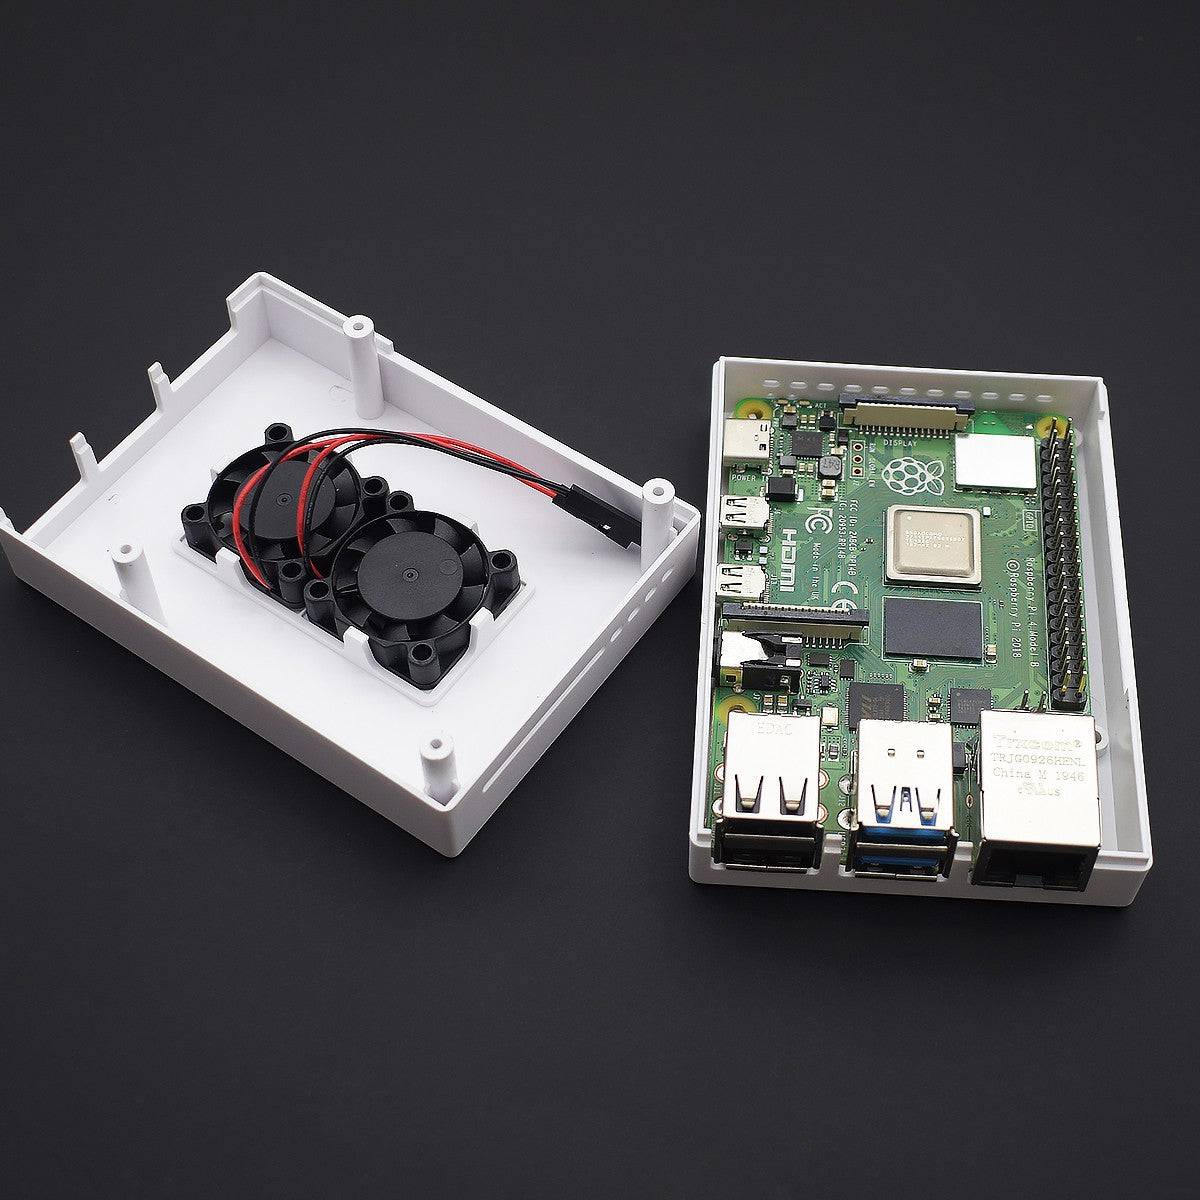 Raspberry Pi 4 ABS Case Firm Dust Resistance With Dual Fan For Pi 4 Model B (White) - RS2662 - REES52